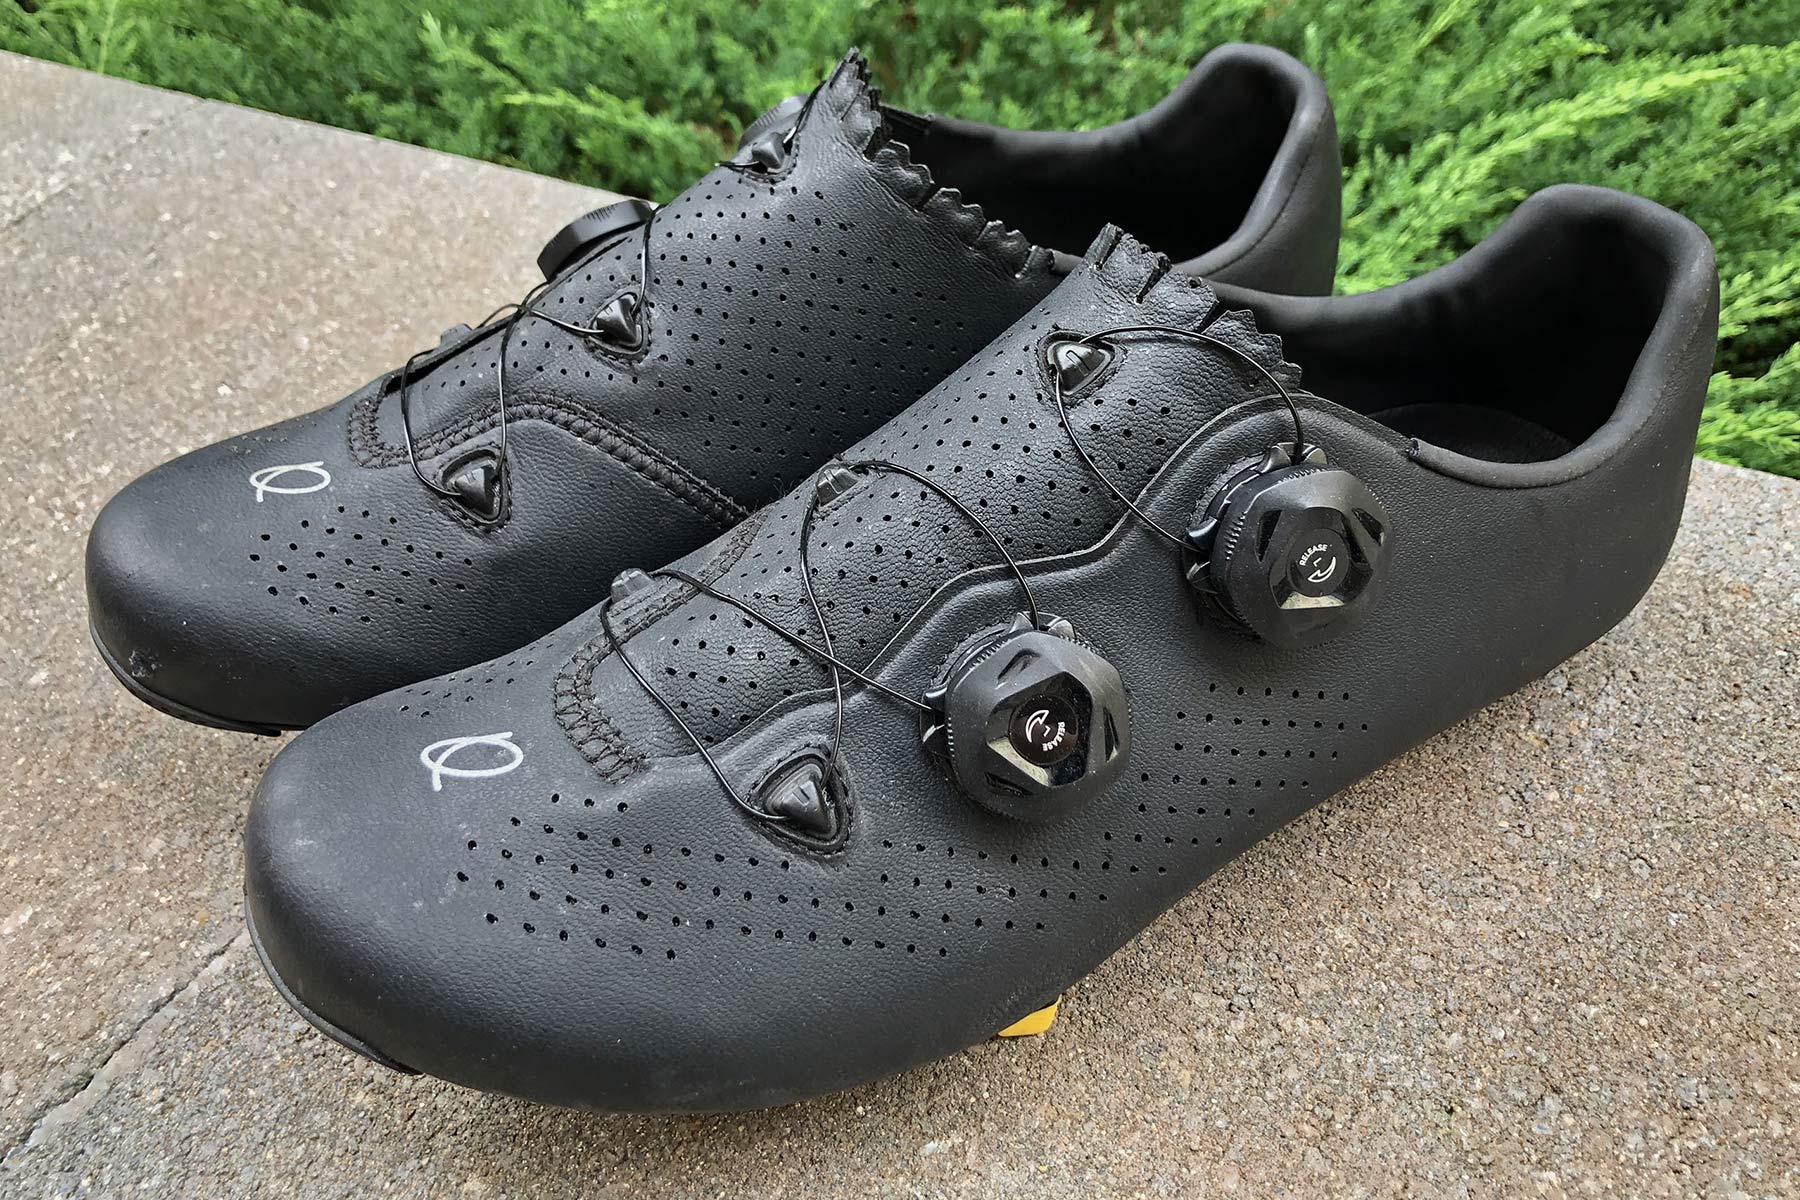 Quoc Mono II lightweight carbon-soled road cycling shoes Review, pair